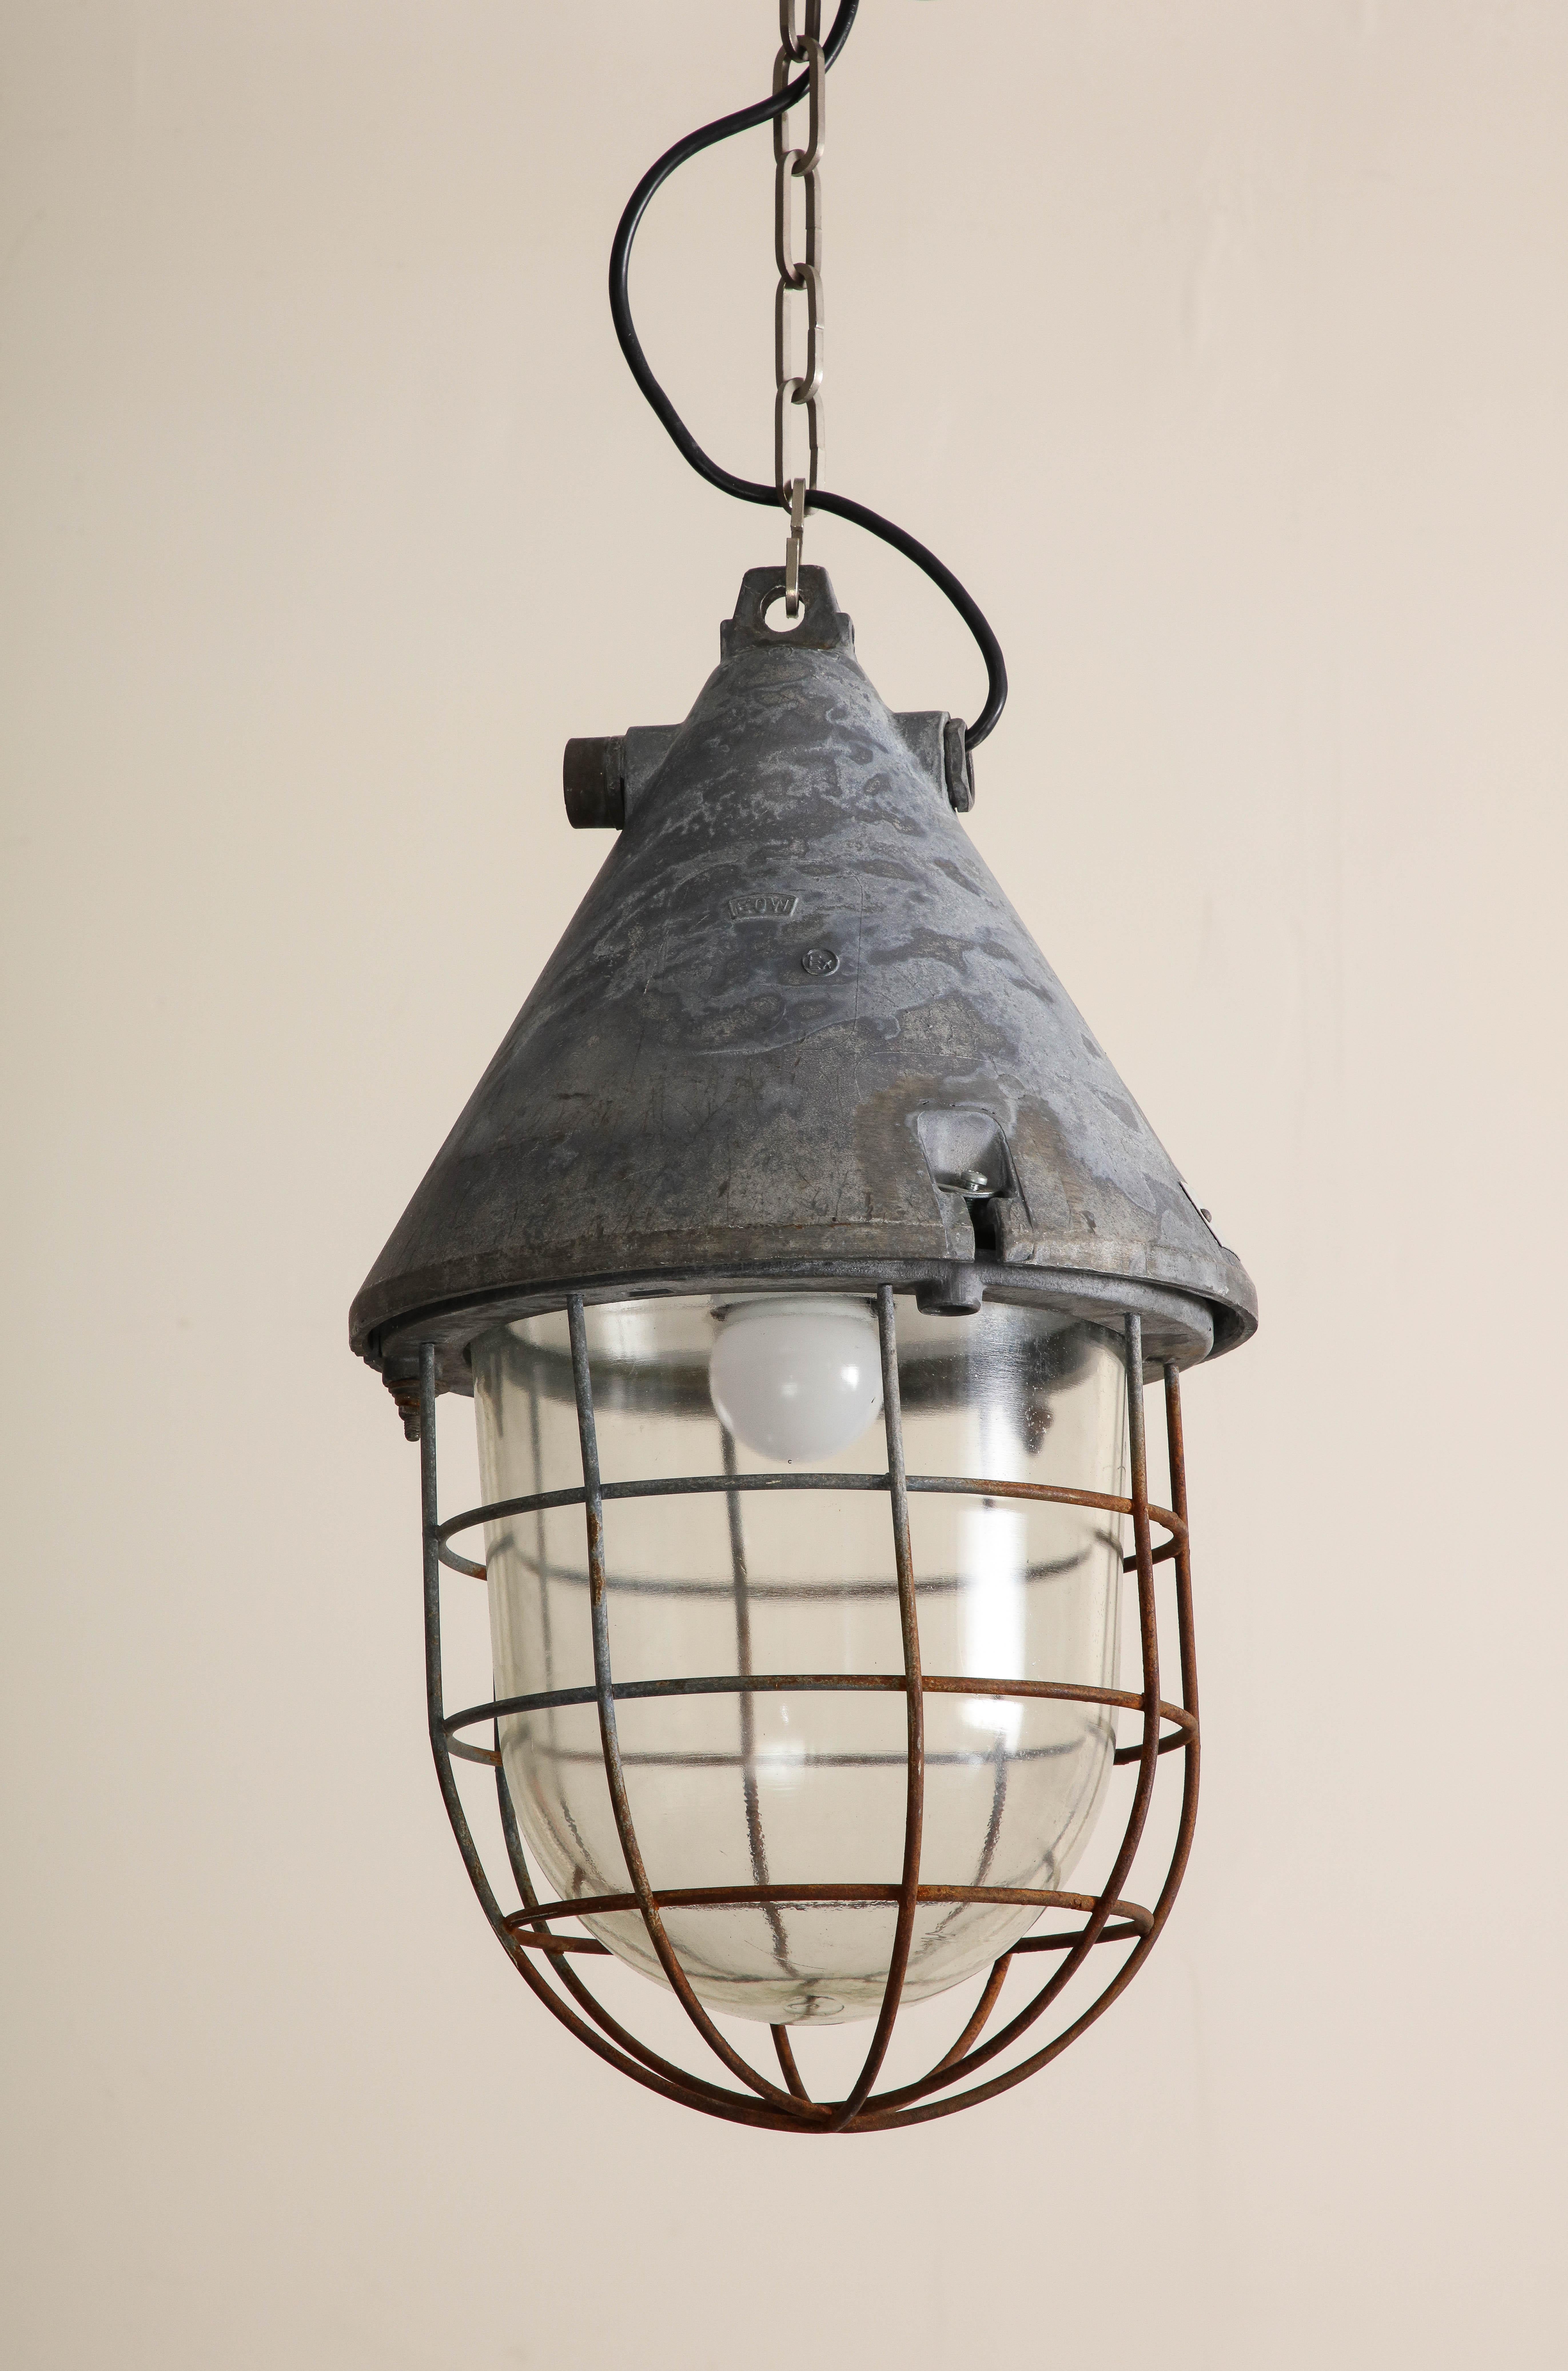 Pair of Vintage Industrial Cast Iron Cage Pendant Lights, C. 1920 For Sale 4